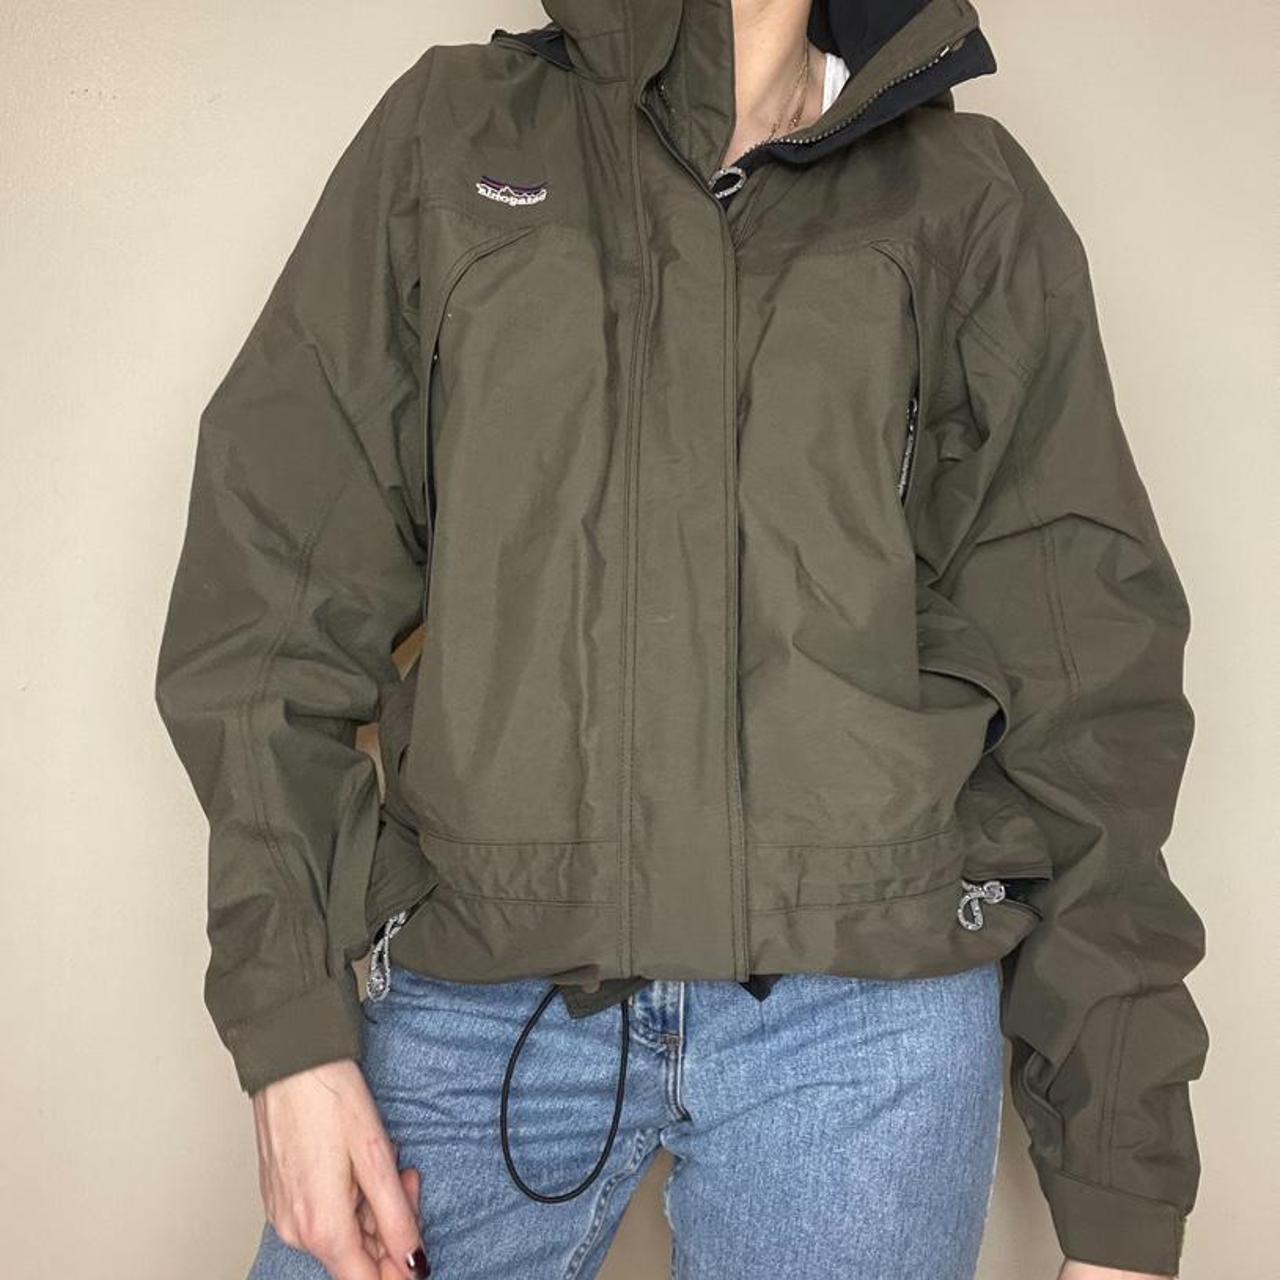 Product Image 2 - Patagonia shell jacket. Excellent condition.